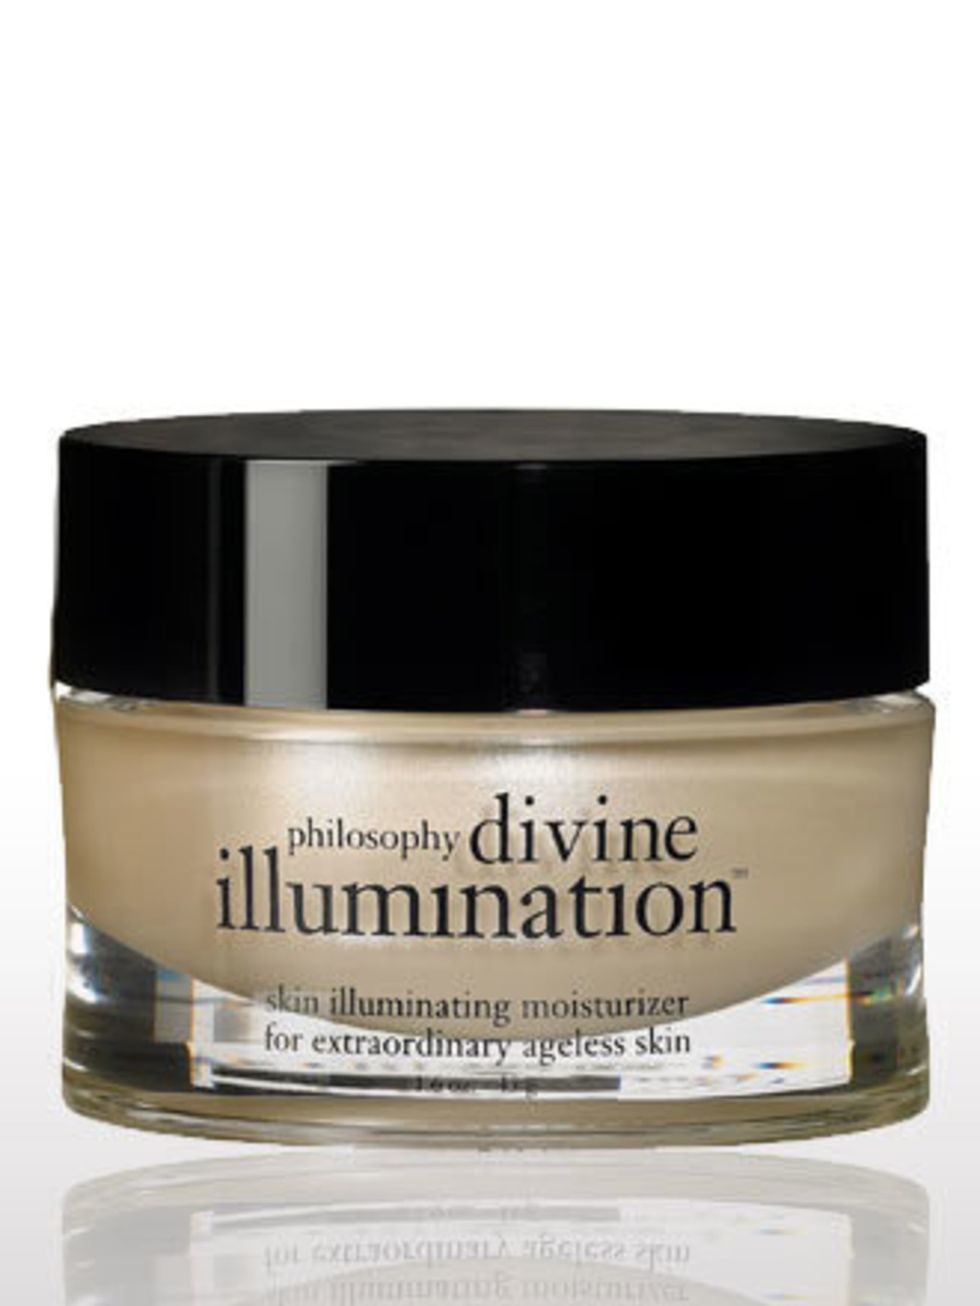 <p>Divine Illumination, £68 by Philosophy exclusive to <a href="http://search.qvcuk.com/QVCUK/Search.ff?query=philosophy&amp;image.x=54&amp;image.y=3%E2%84%91=Search&amp;cm_re=PAGE-_-SEARCH-_-SEARCH">QVC</a></p><p>Like molten gold in a jar, the shimmering